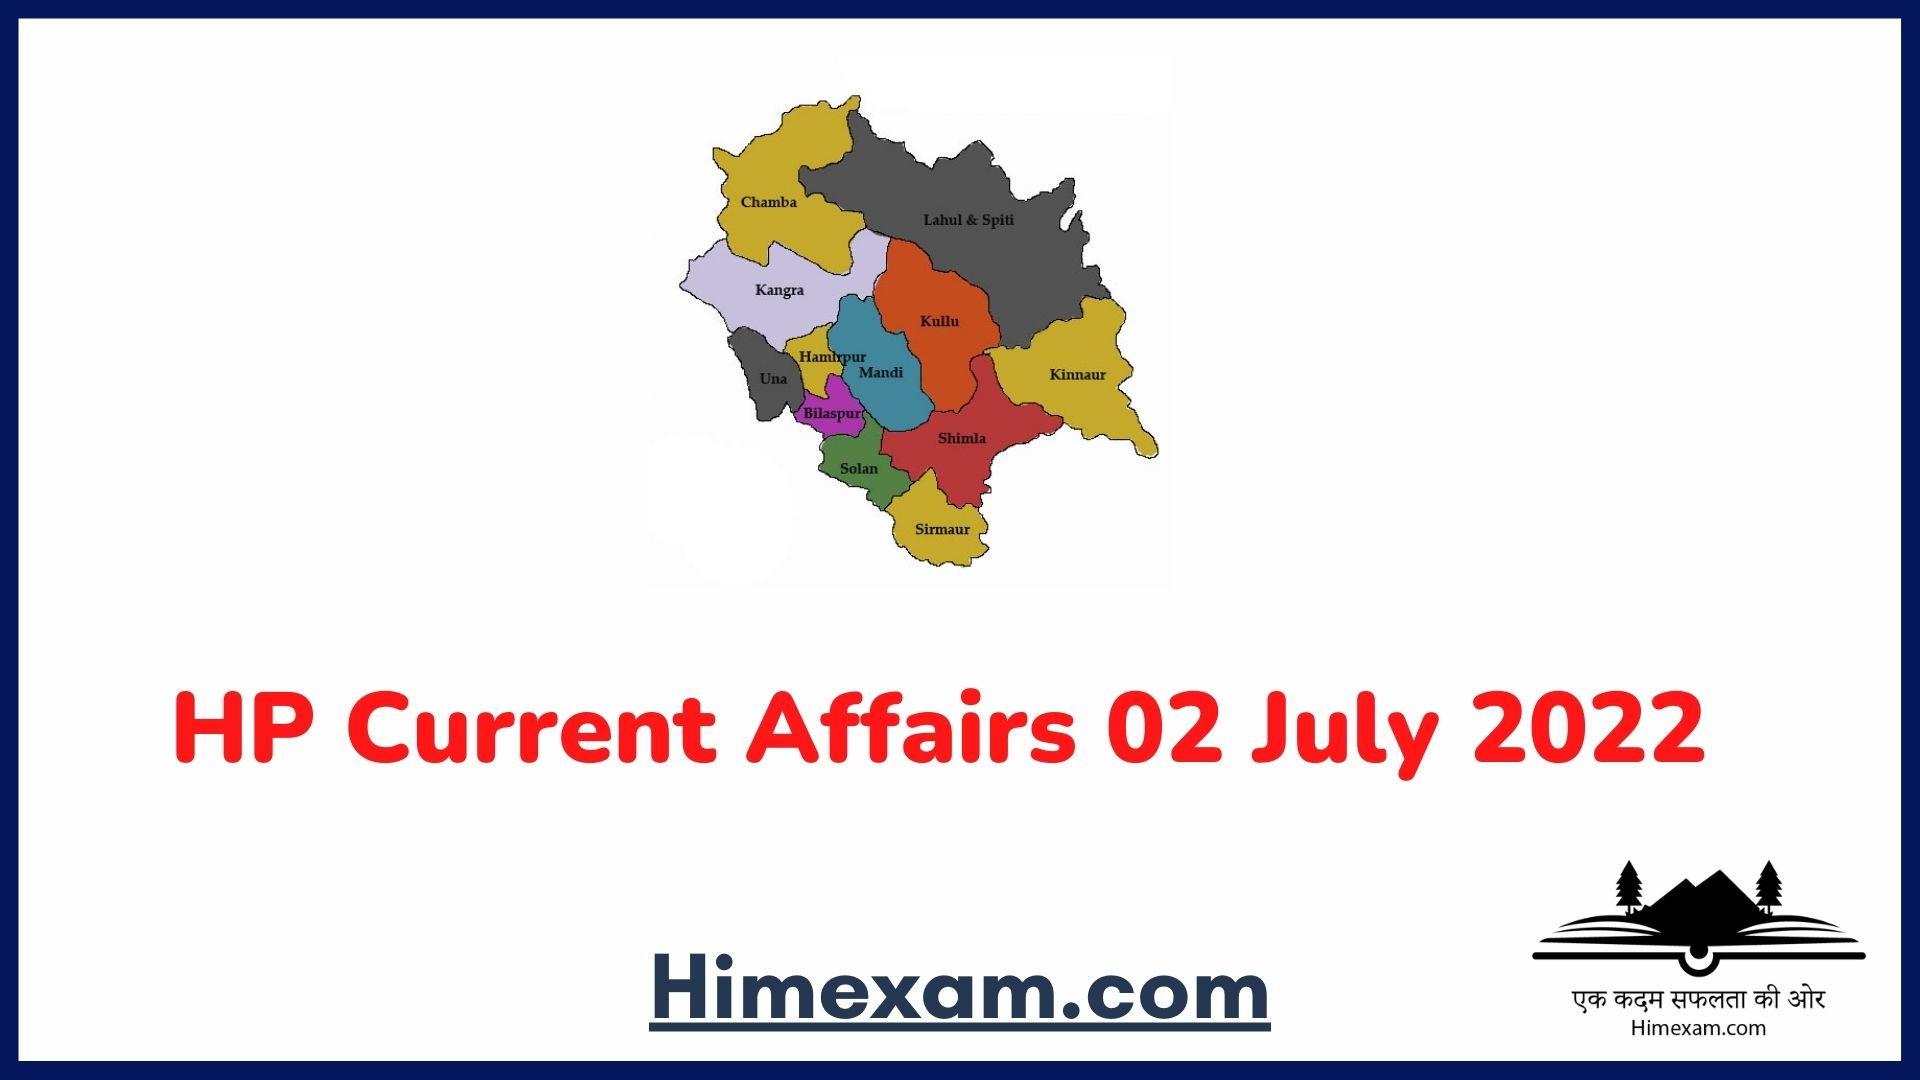 HP Current Affairs 02 July 2022